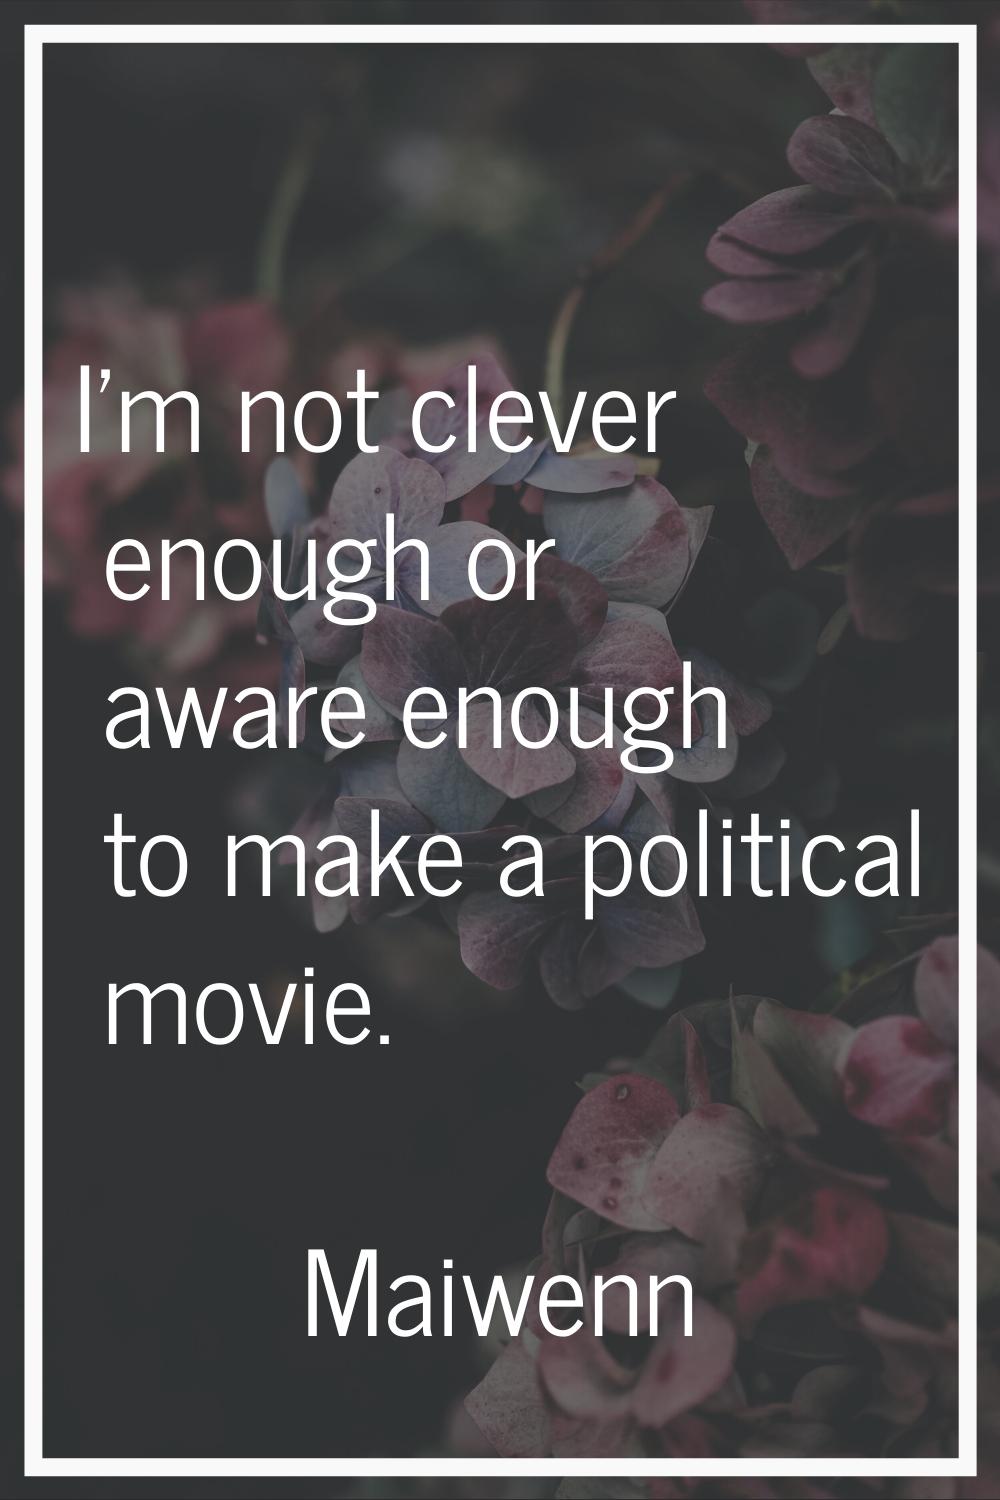 I'm not clever enough or aware enough to make a political movie.